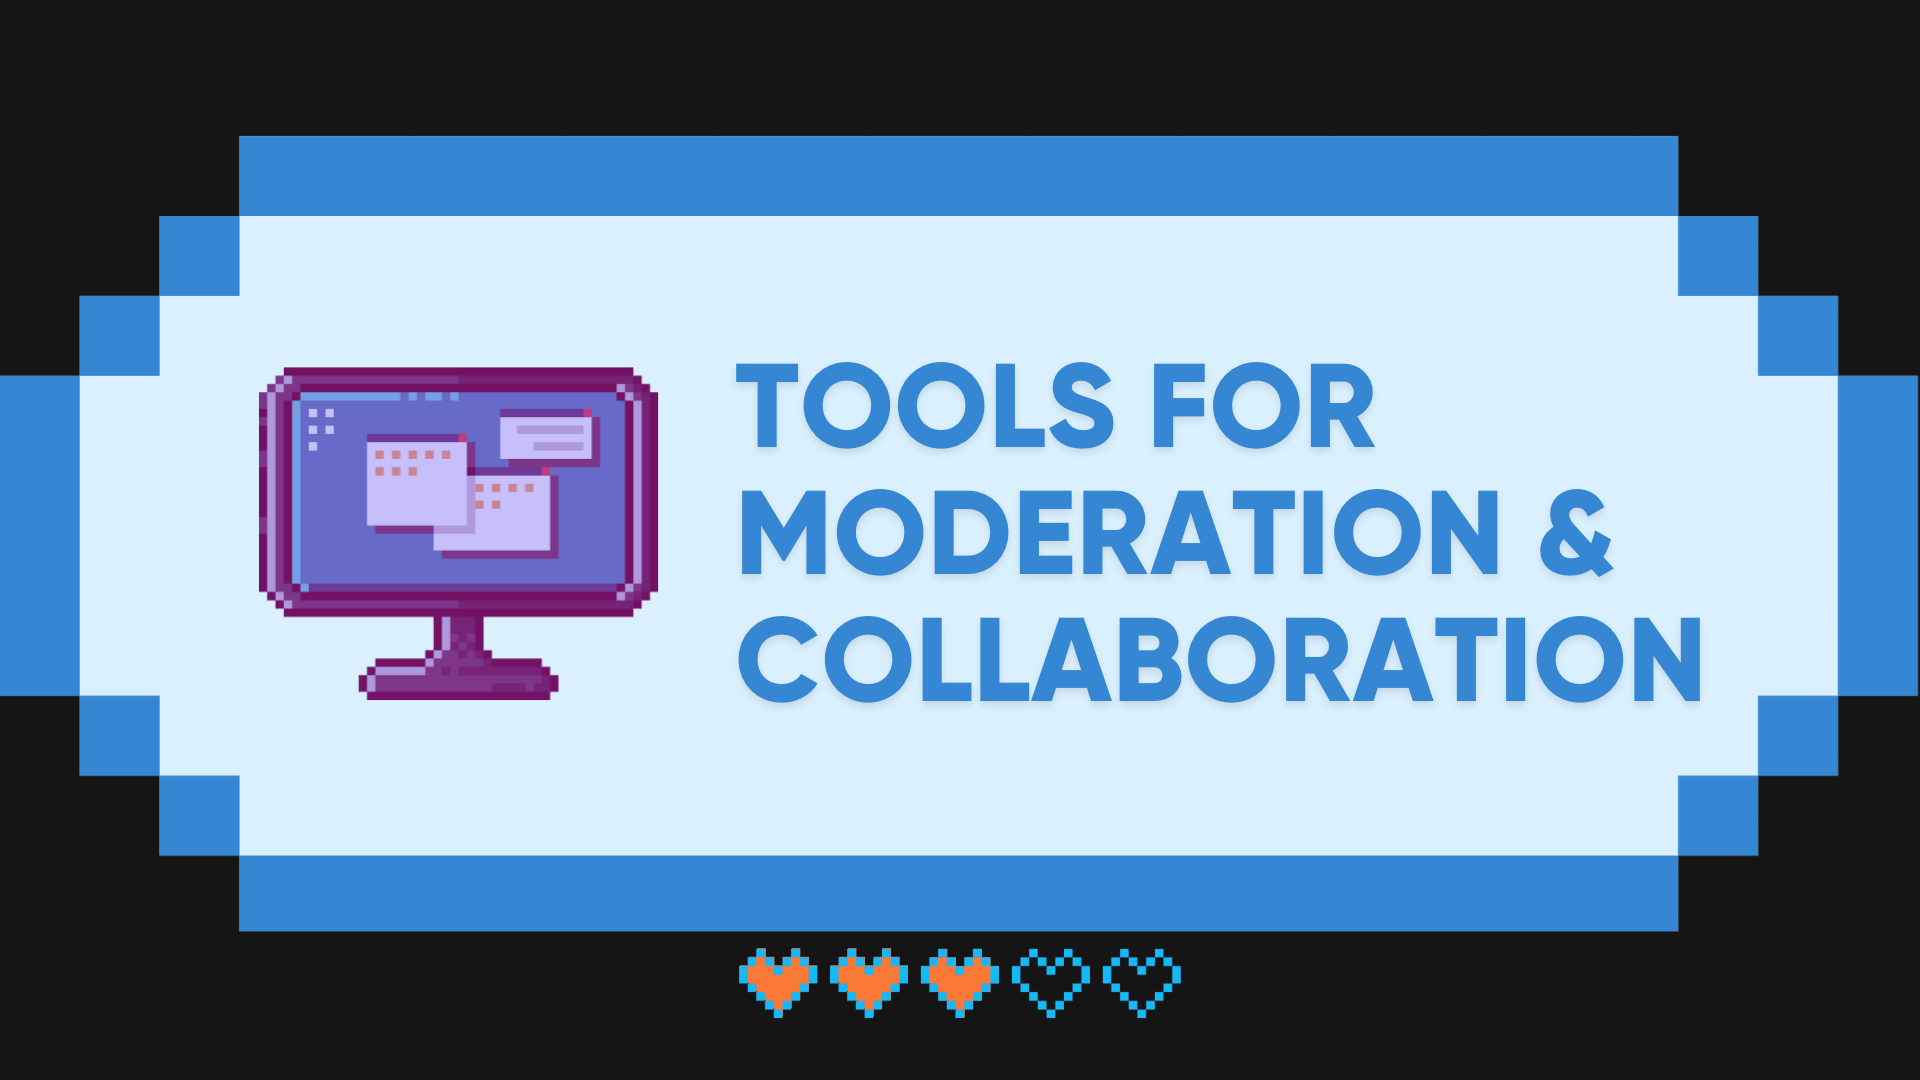 Tools for moderation and collaboration